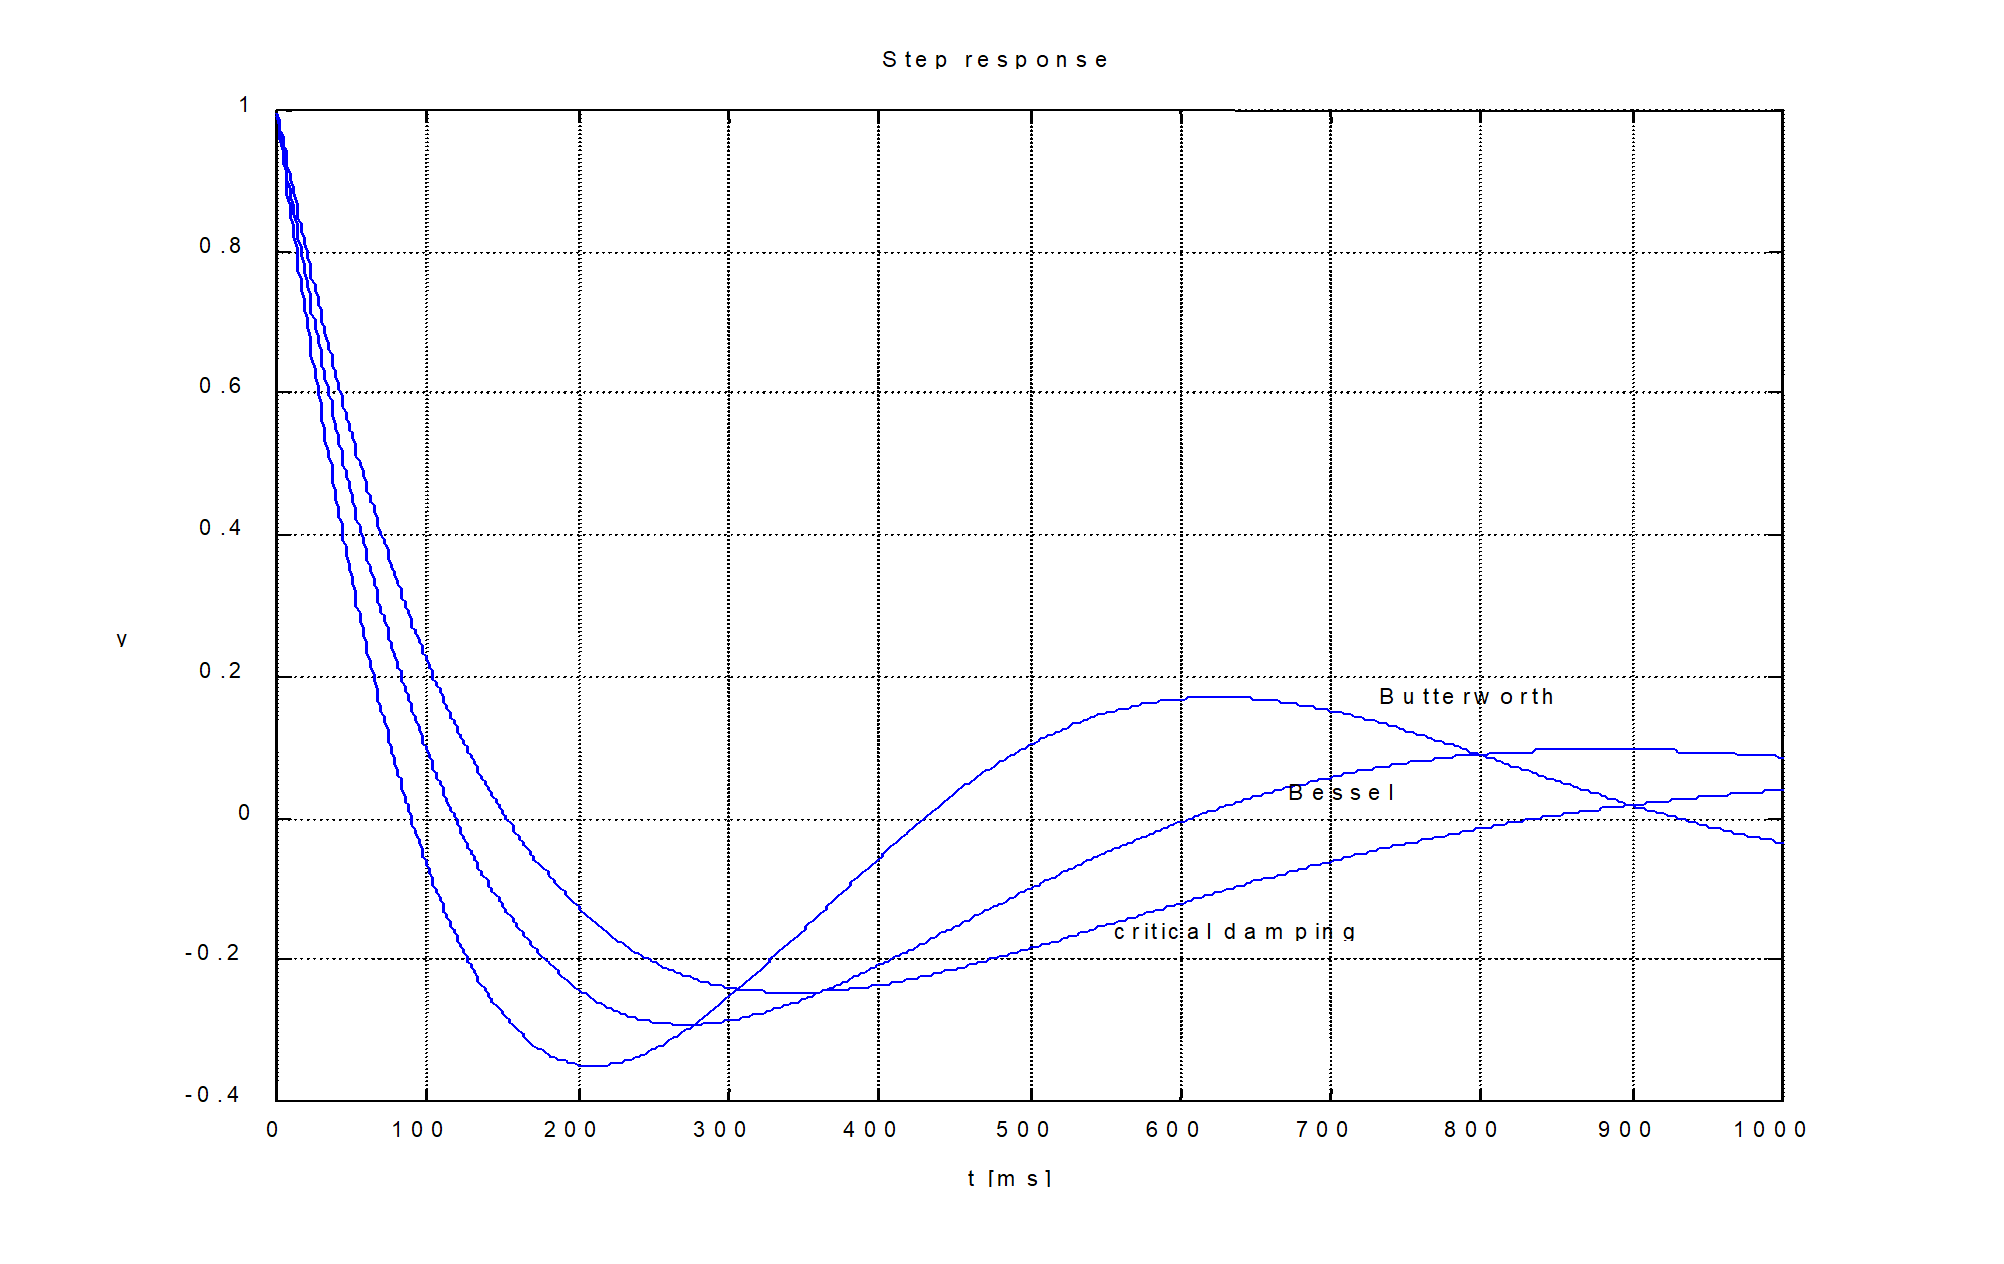 Step response of high-pass filters (4th order)